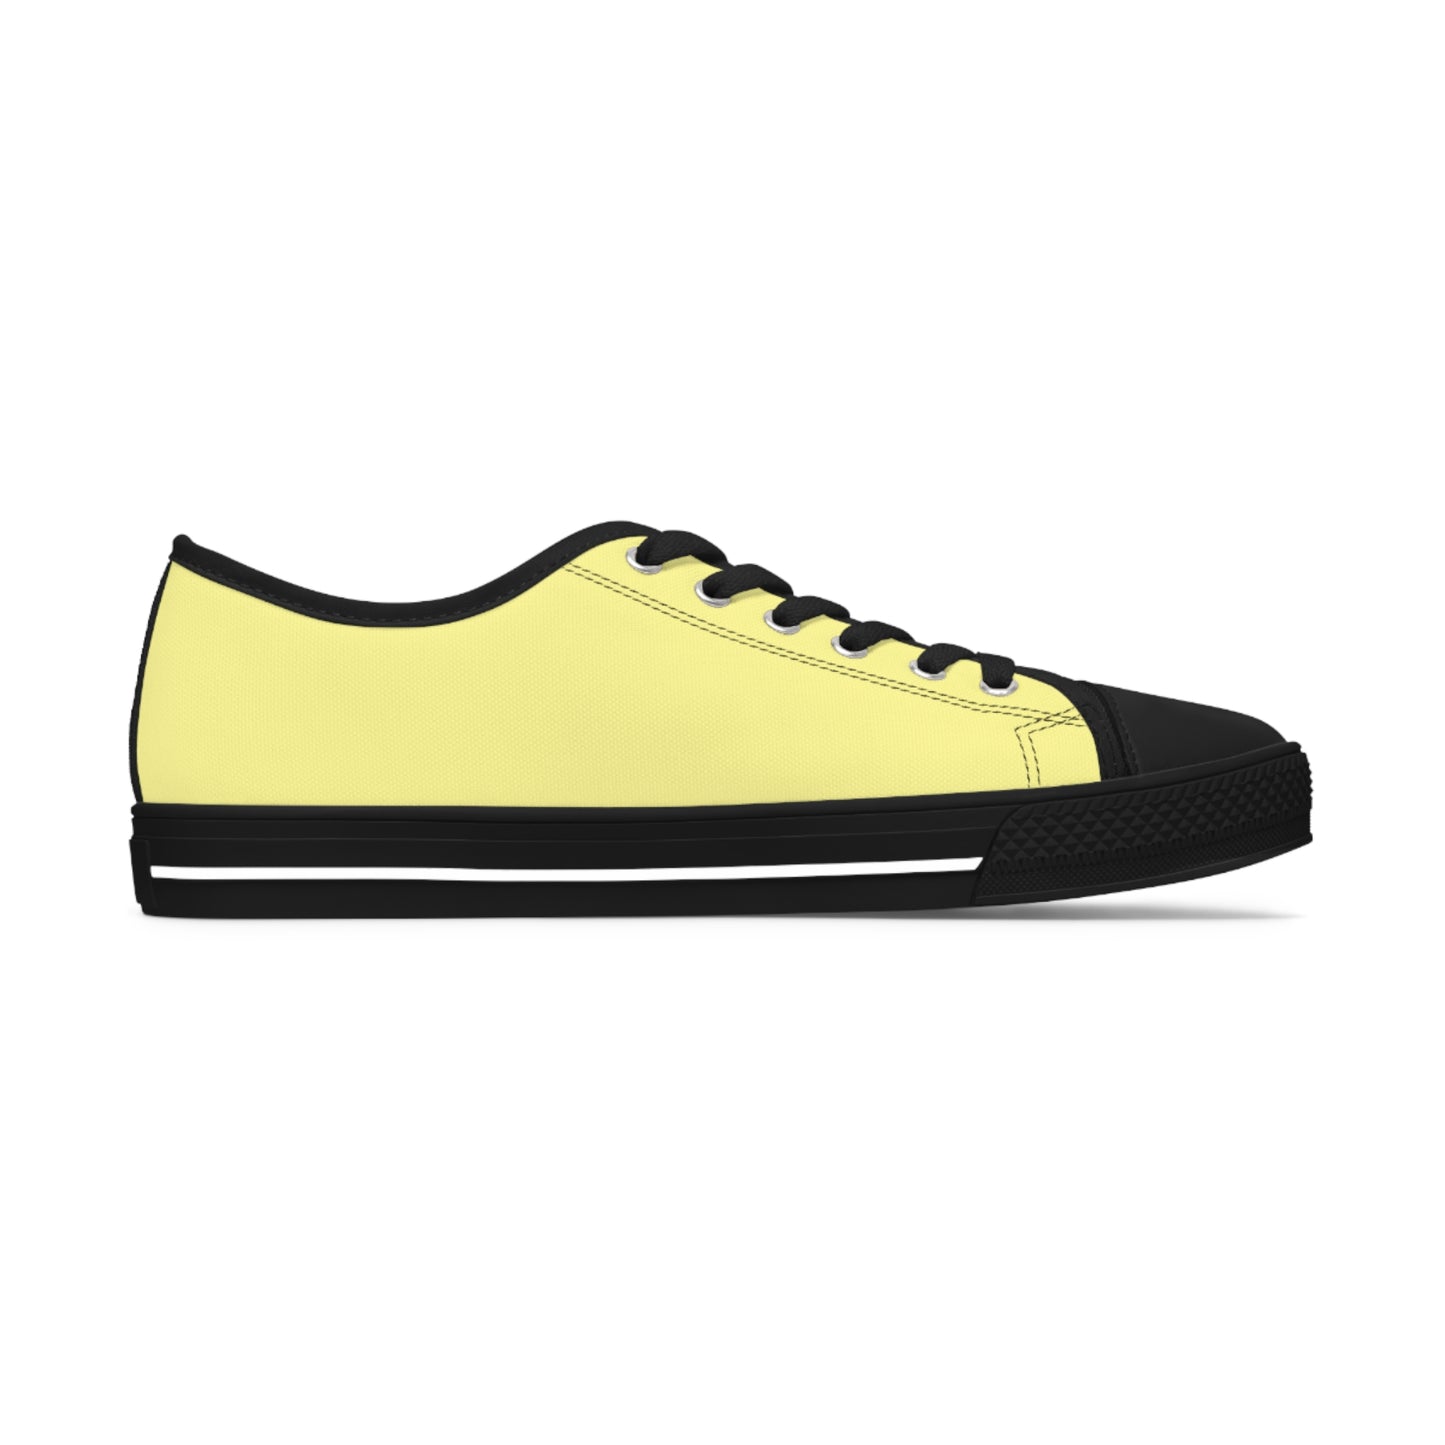 Women's Canvas Low Top Solid Color Sneakers - Lemon Yellow US 12 White sole